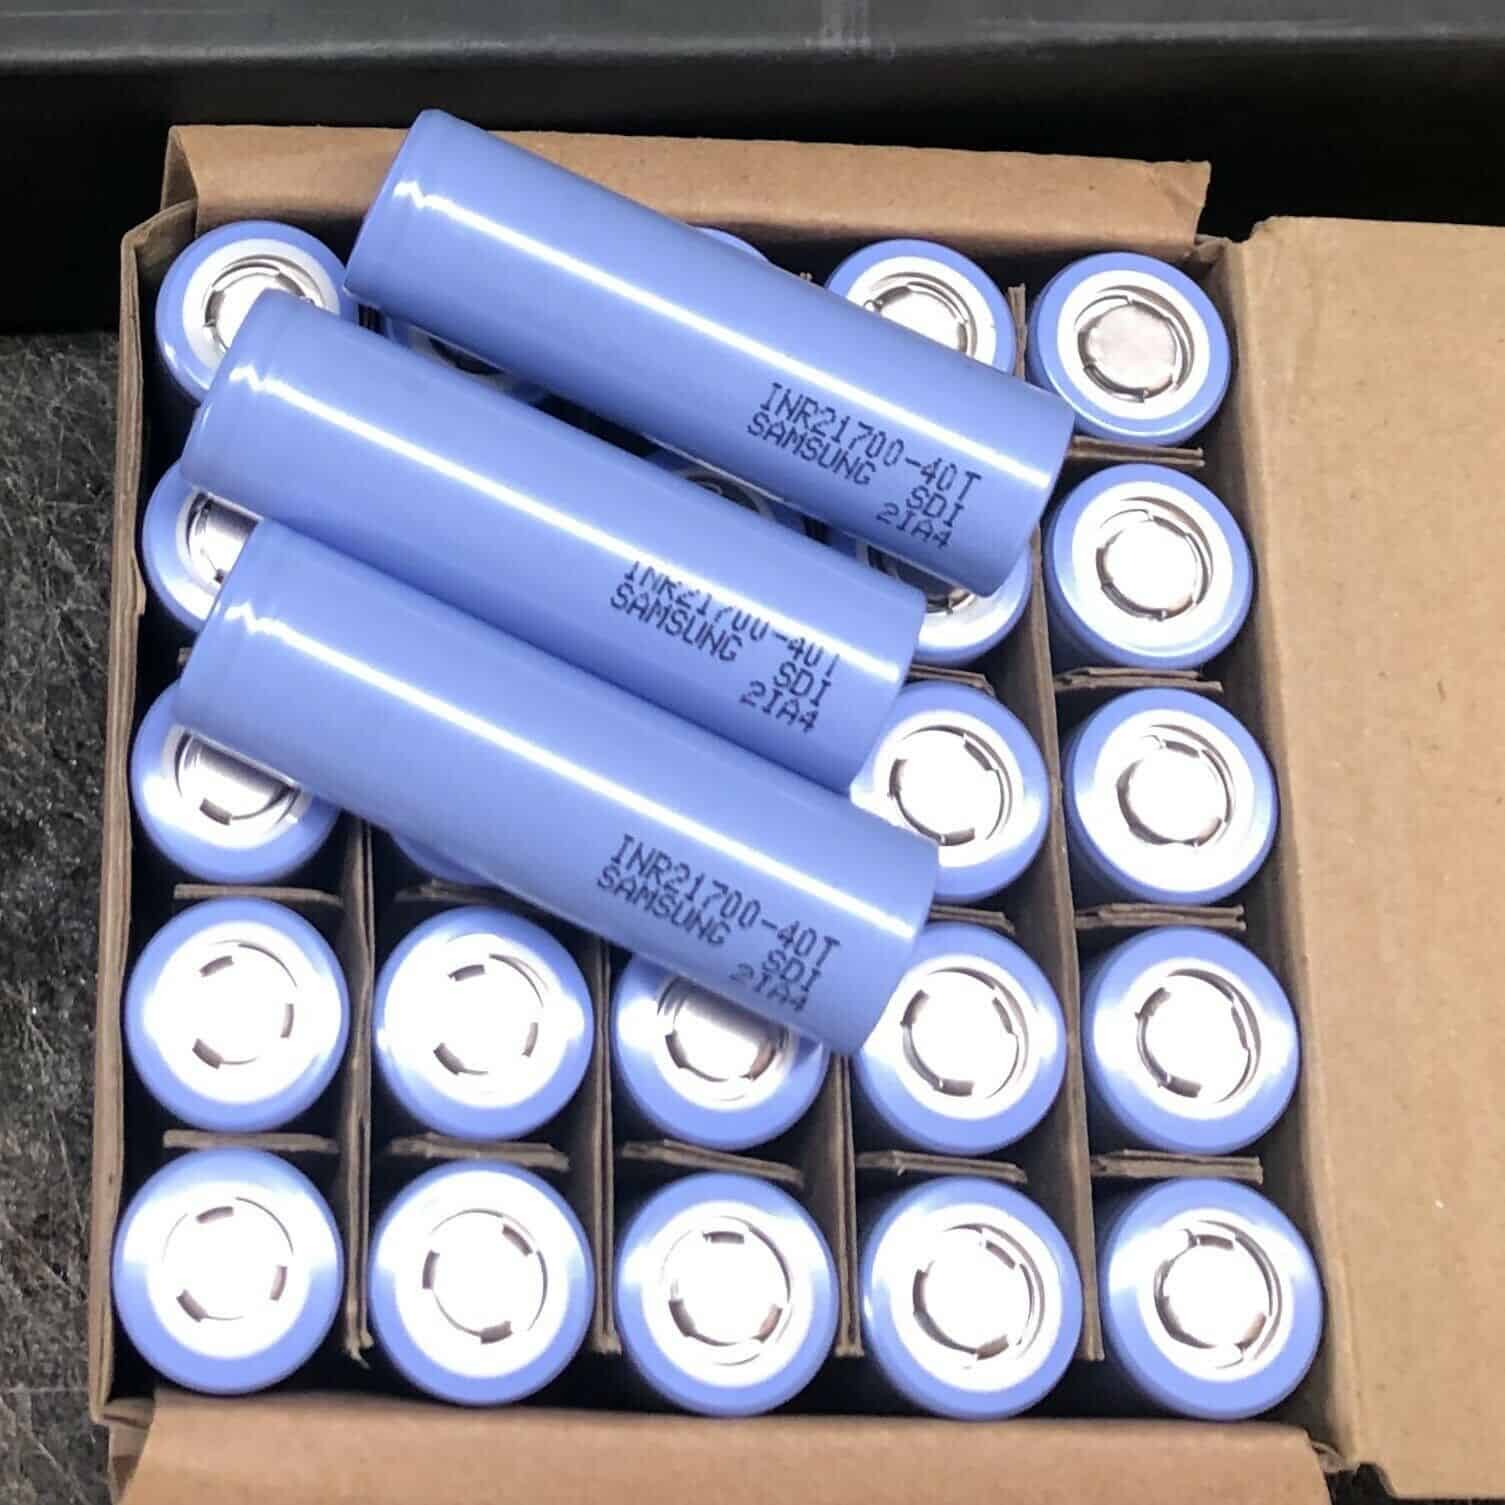 A box of batteries are sitting in the open.